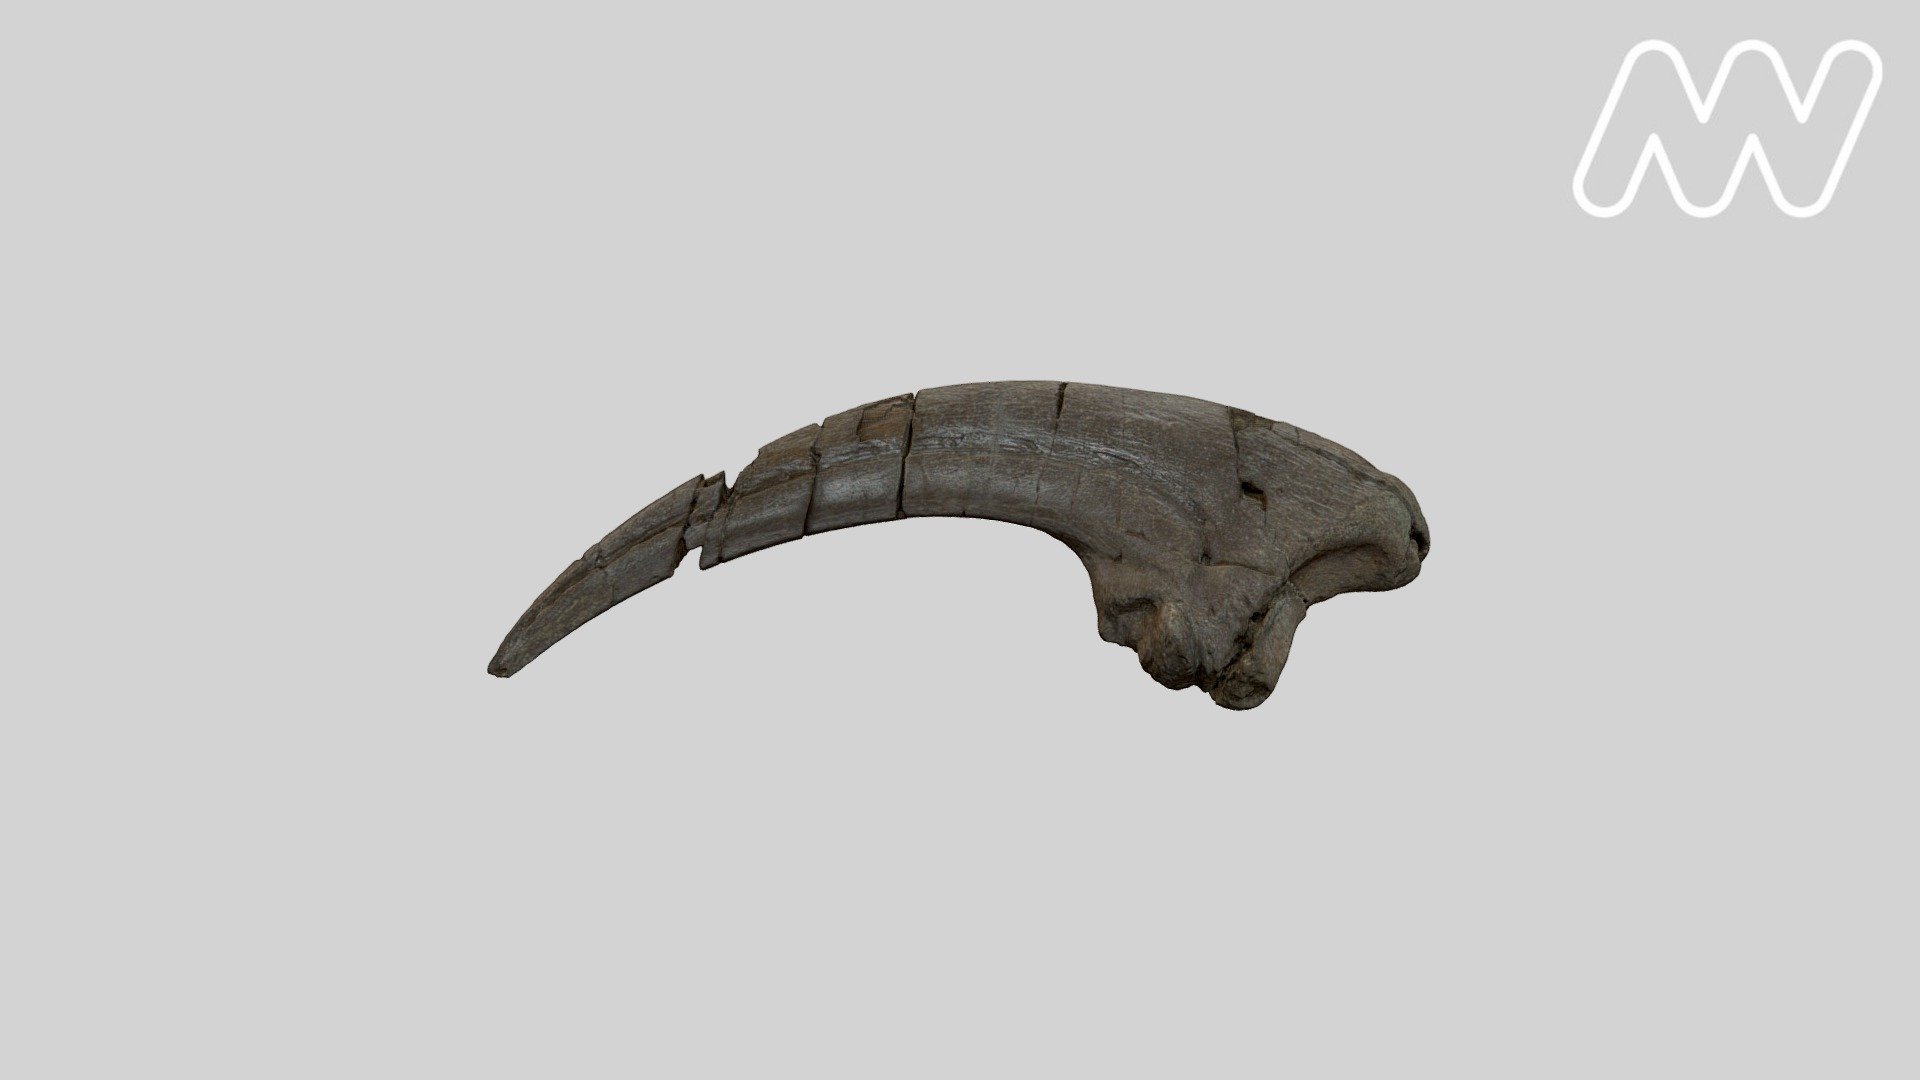 This is the fossilised claw of a carnivorous (meat-eating) dinosaur. It was found at Cape Otway, Victoria in 2014 by John Wilkins during fieldwork by a Museum Victoria-led team of researchers and volunteers.

This claw is very similar to the claw of Australovenator wintonensis, a theropod dinosaur found in Queensland and described in 2009. We think that this claw specimen is from a dinosaur closely related to Australovenator, if not from the same species. Both Victorian and Queensland dinosaurs would have been alive about 100 million years ago during the Cretaceous period.

The Museum Victoria claw is obviously from a carnivore, being rather sharp. In life it would have been even longer and sharper as the bone would have been covered by a horny sheath. This would have been attached at the groove running down the side of the claw 3d model